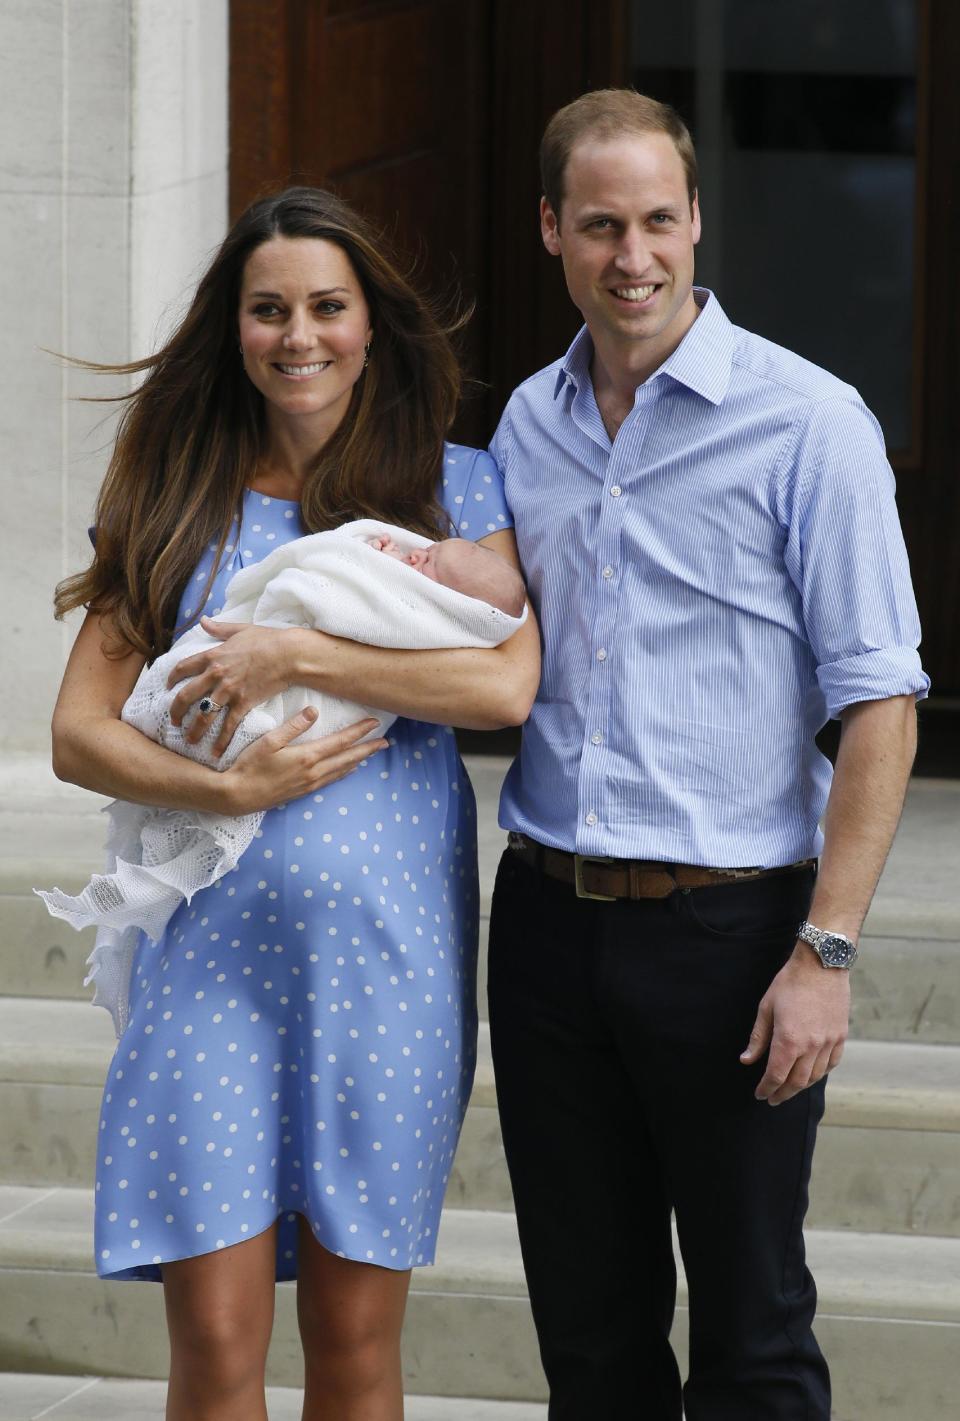 FILE - In this July 23, 2013 photo, Britain's Prince William and Kate, Duchess of Cambridge pose with the Prince of Cambridge outside St. Mary's Hospital in London where the Duchess gave birth on Monday, July 22. Princess Diana wore a caftan-like outfit that hid the post-childbirth tummy bump when William was born. In contrast, the former Kate Middleton, in her first public appearance after giving birth, wore a dress that did not camouflage her belly, and many women are applauding her choice. (AP Photo/Kirsty Wigglesworth)